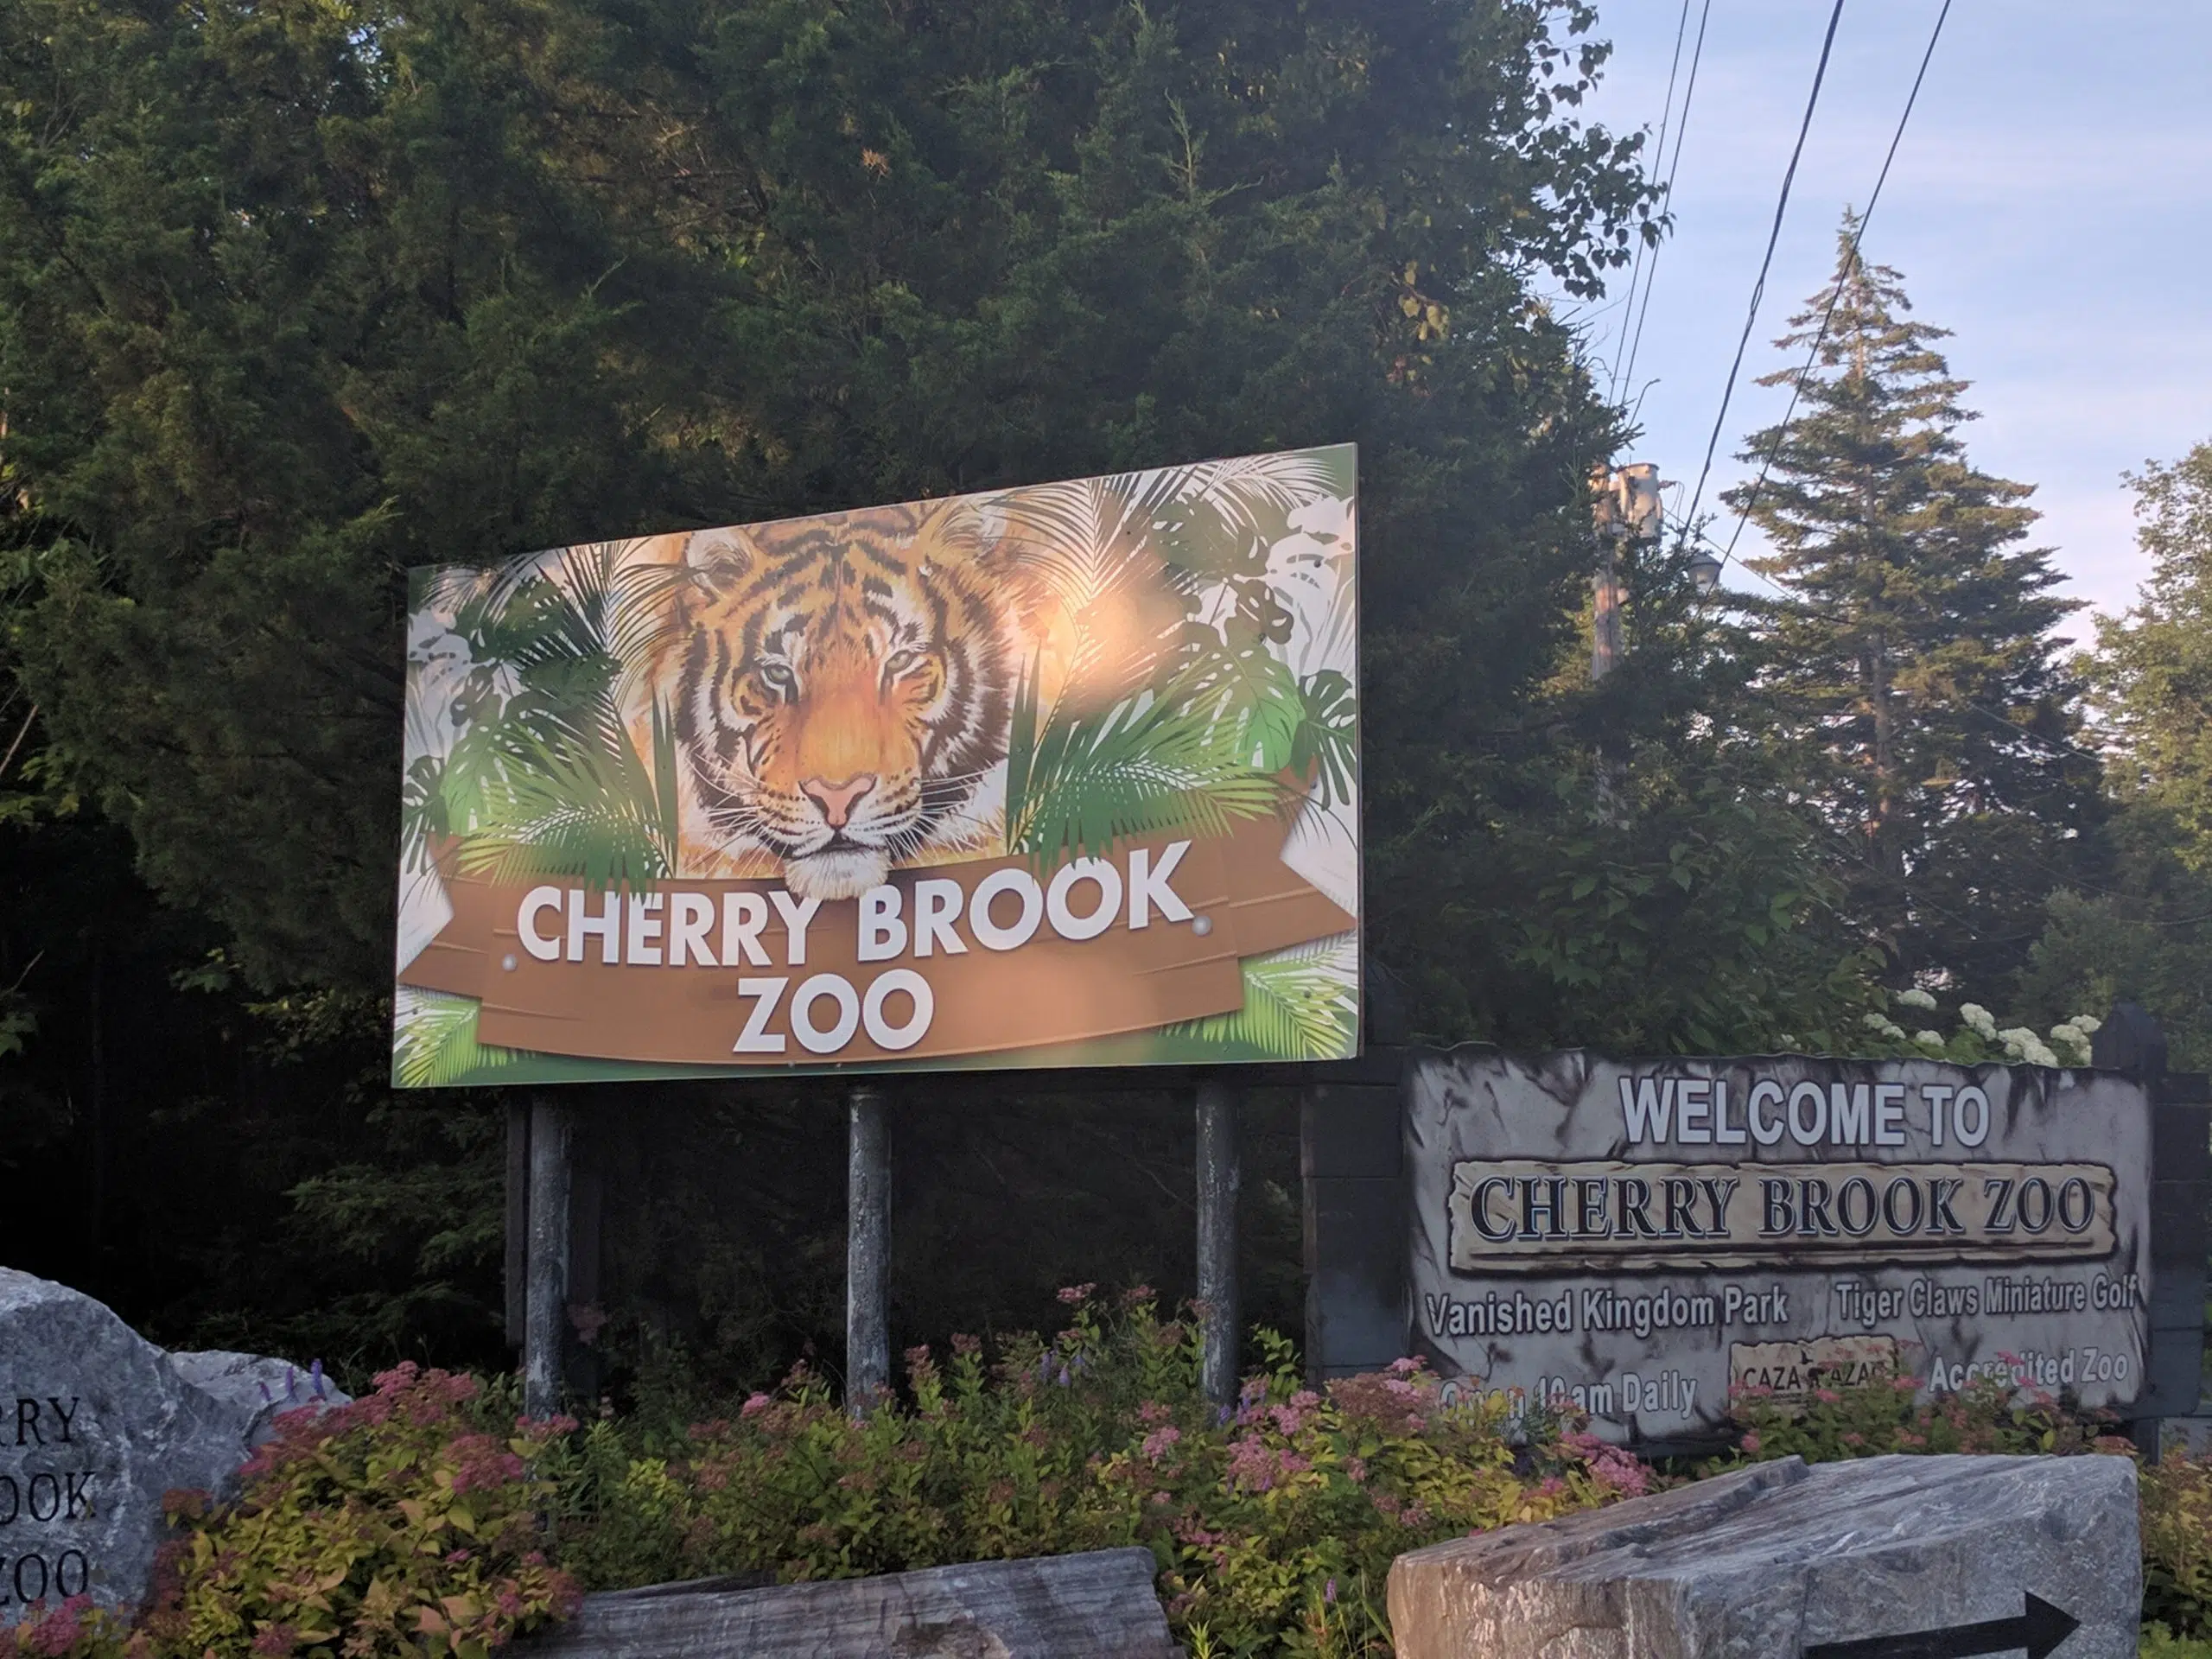 City Seeks New Vision For Former Zoo Property